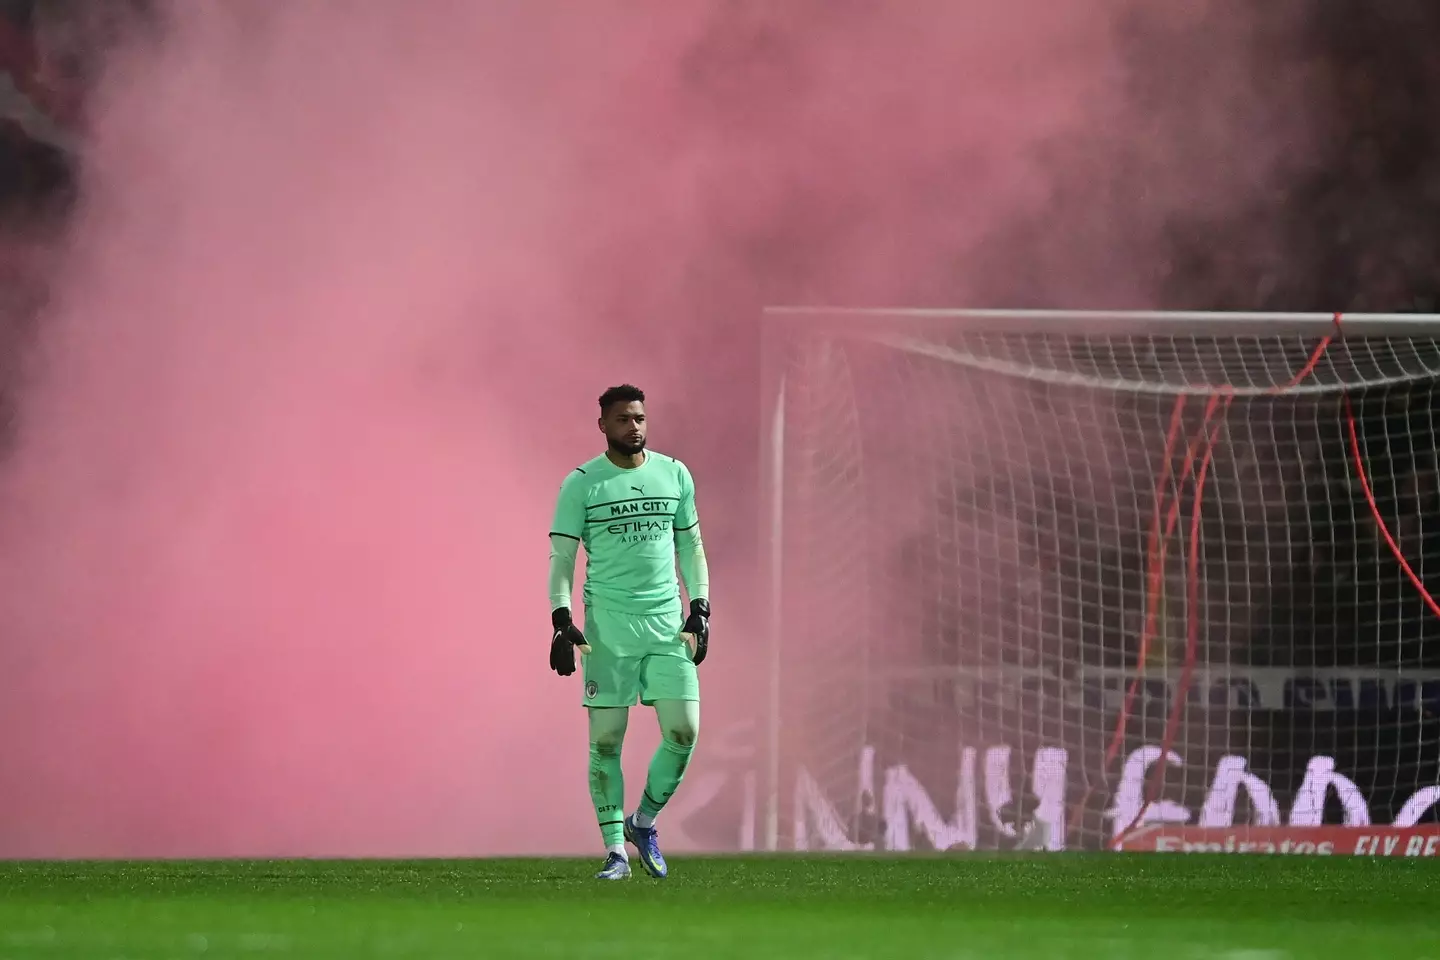 Zack Steffen in Manchester City action (Image: Sportimage / Alamy)